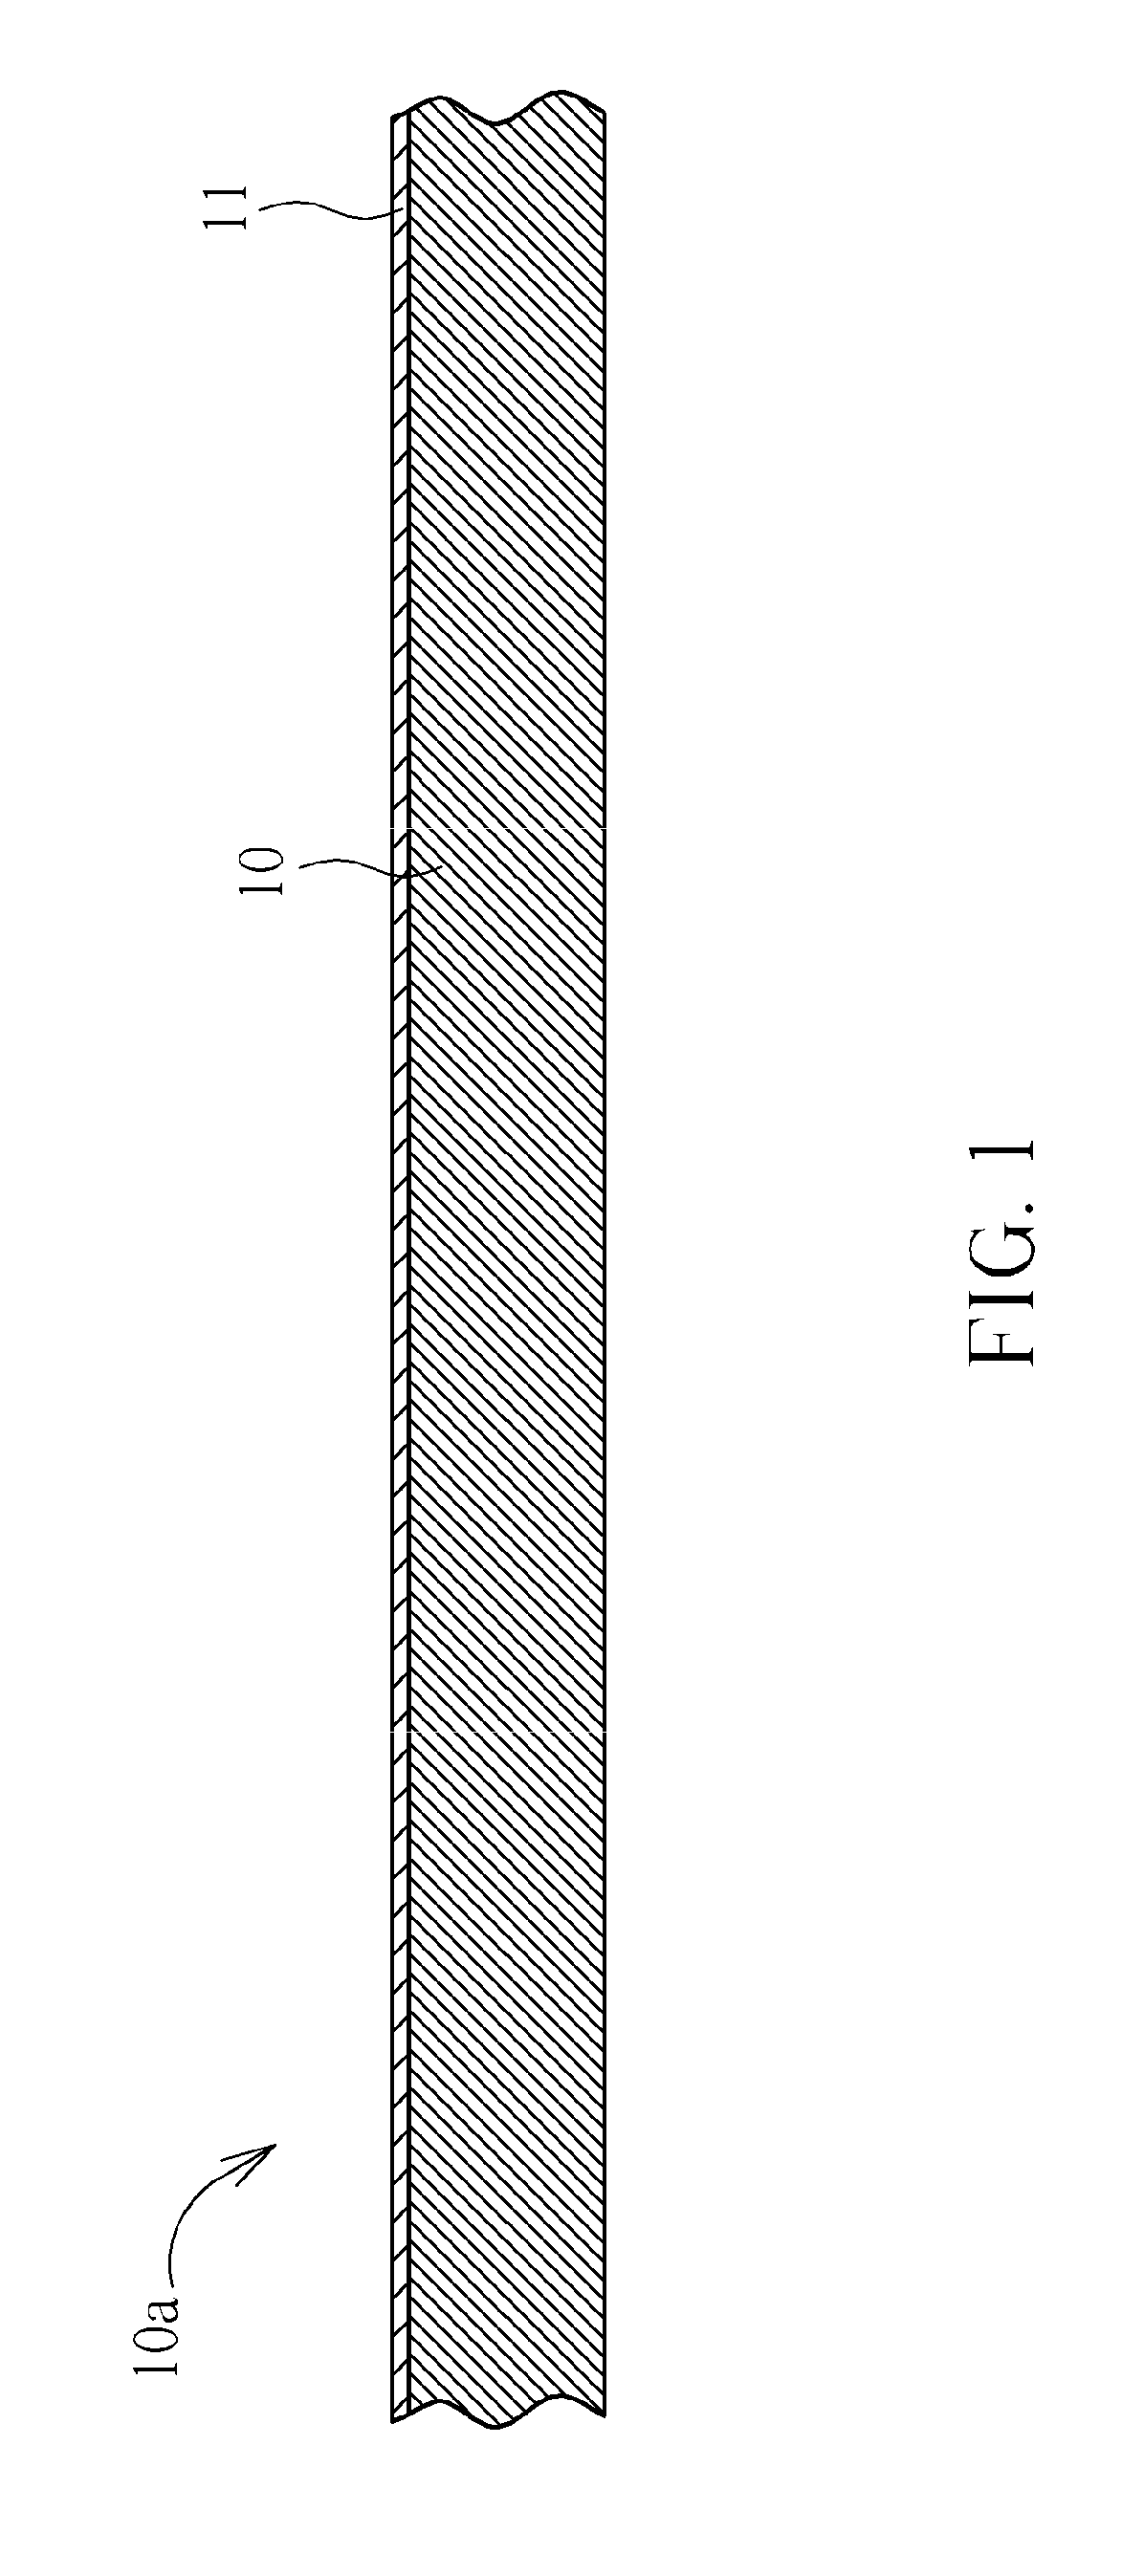 High-reflection submount for light-emitting diode package and fabrication method thereof